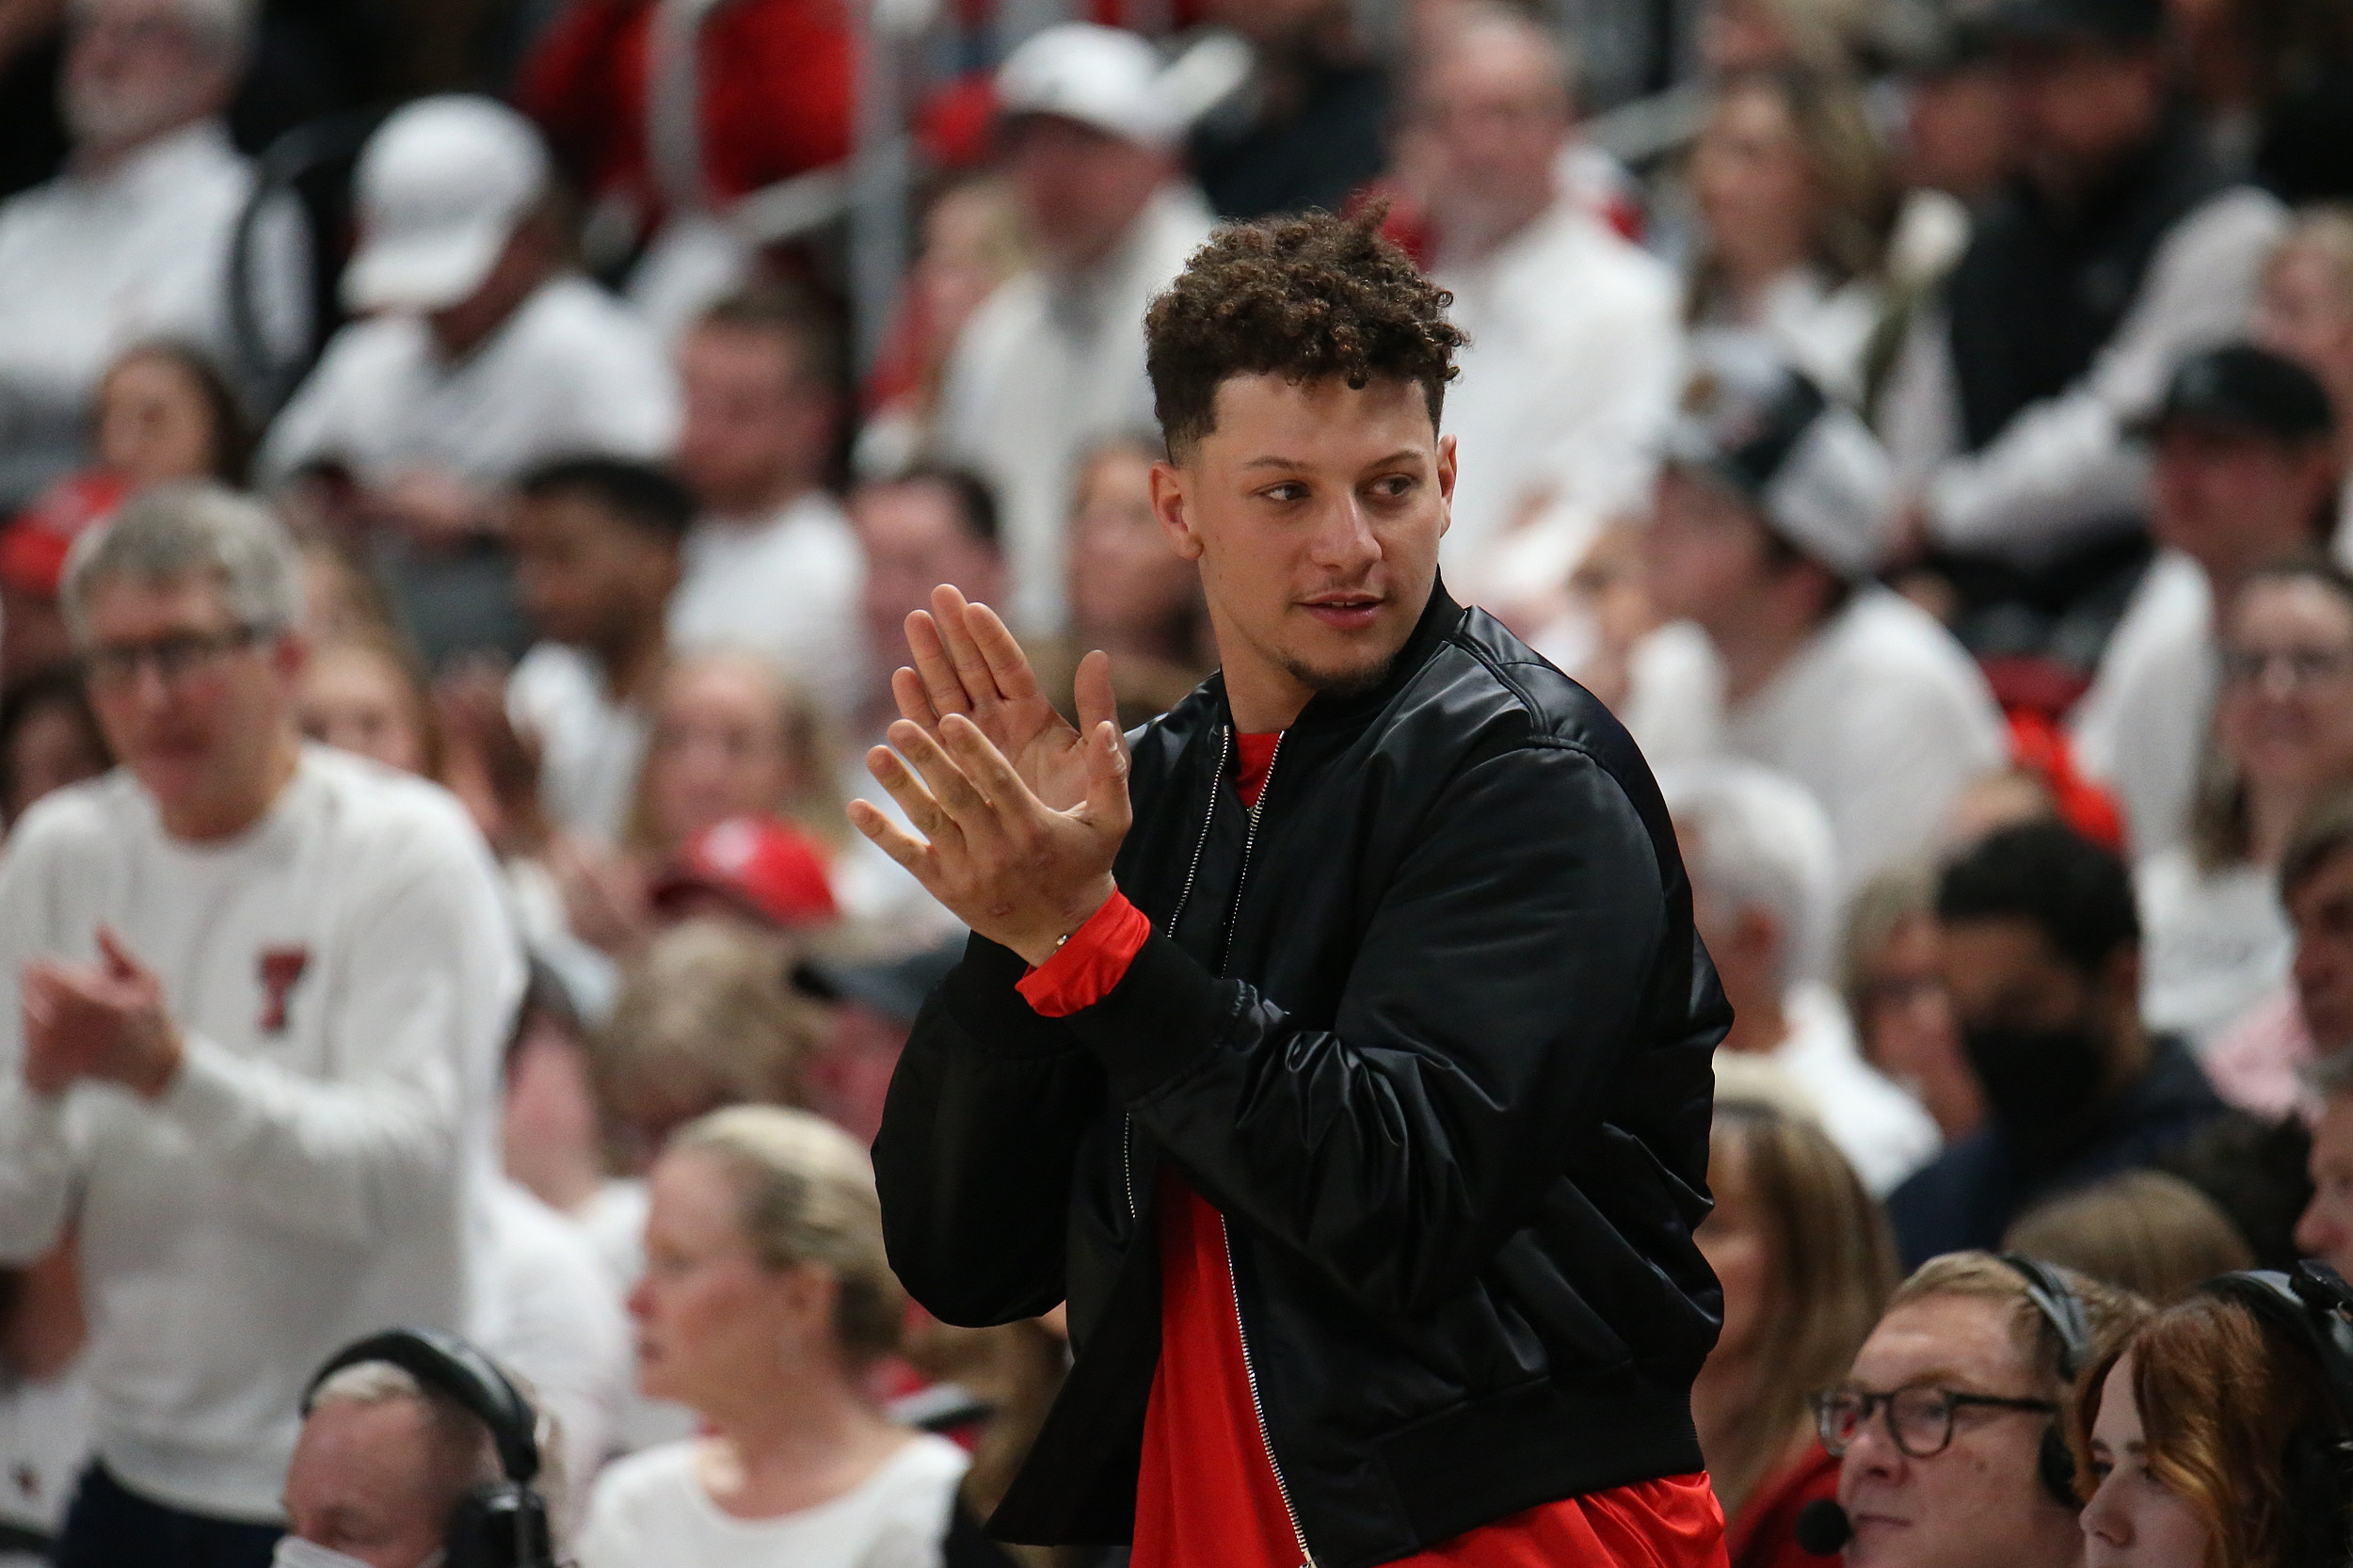 Patrick Mahomes to be Texas Tech 2020 Spring Commencement speaker